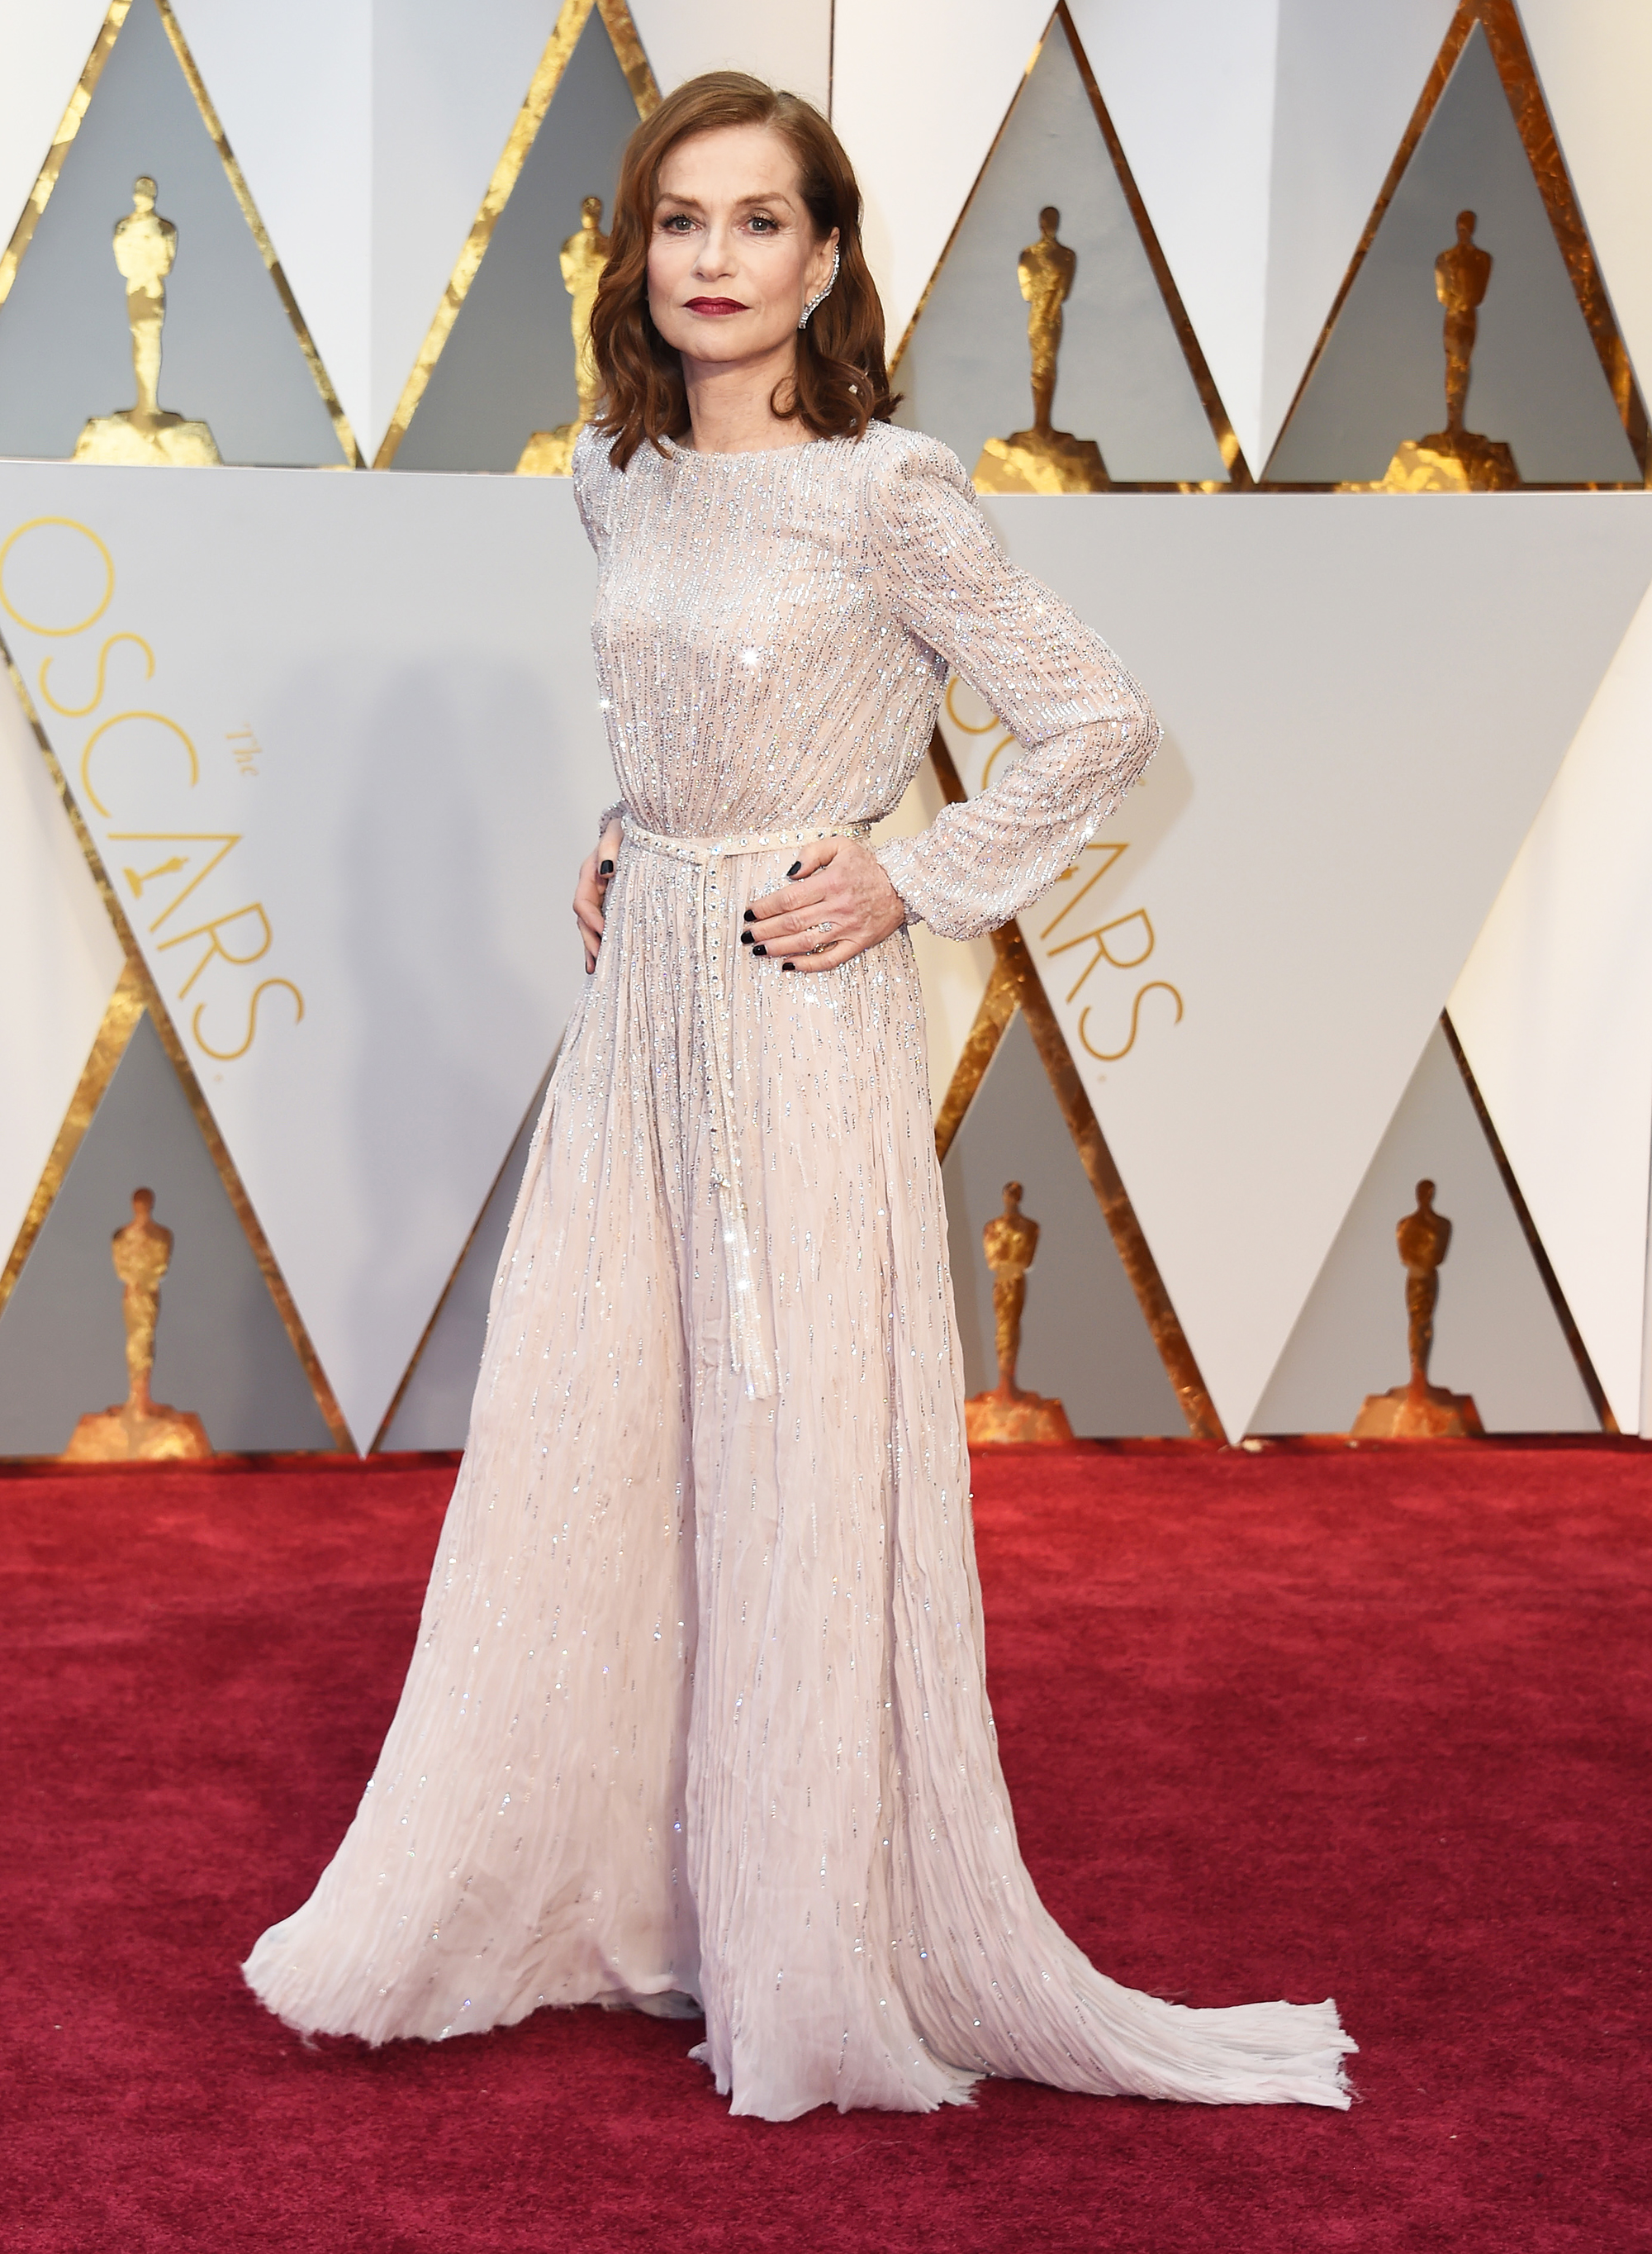 Isabelle Huppert on the red carpet for the 89th Oscars, on Feb. 26, 2017 in Hollywood, Calif.